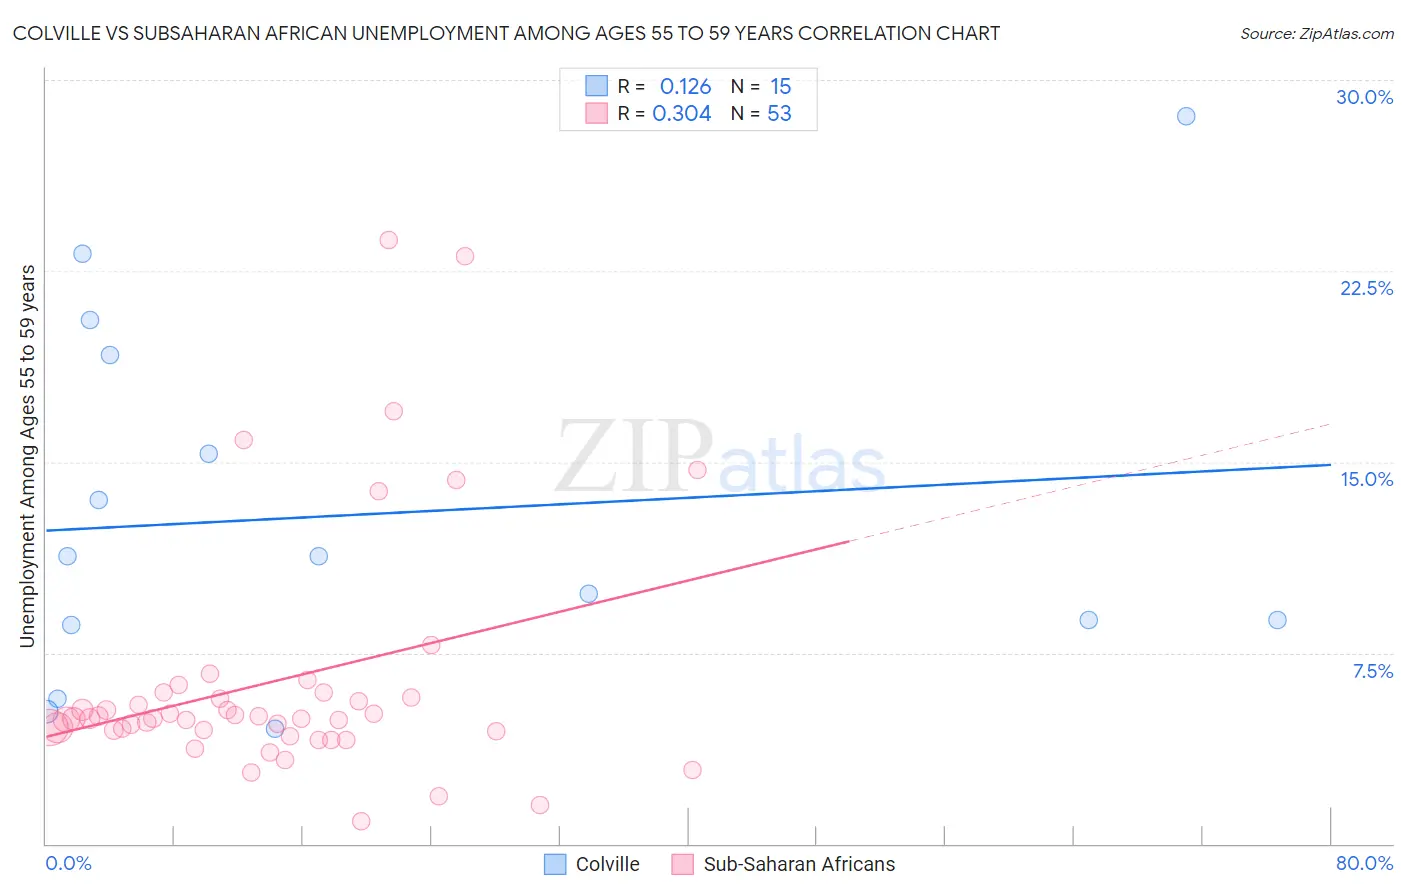 Colville vs Subsaharan African Unemployment Among Ages 55 to 59 years